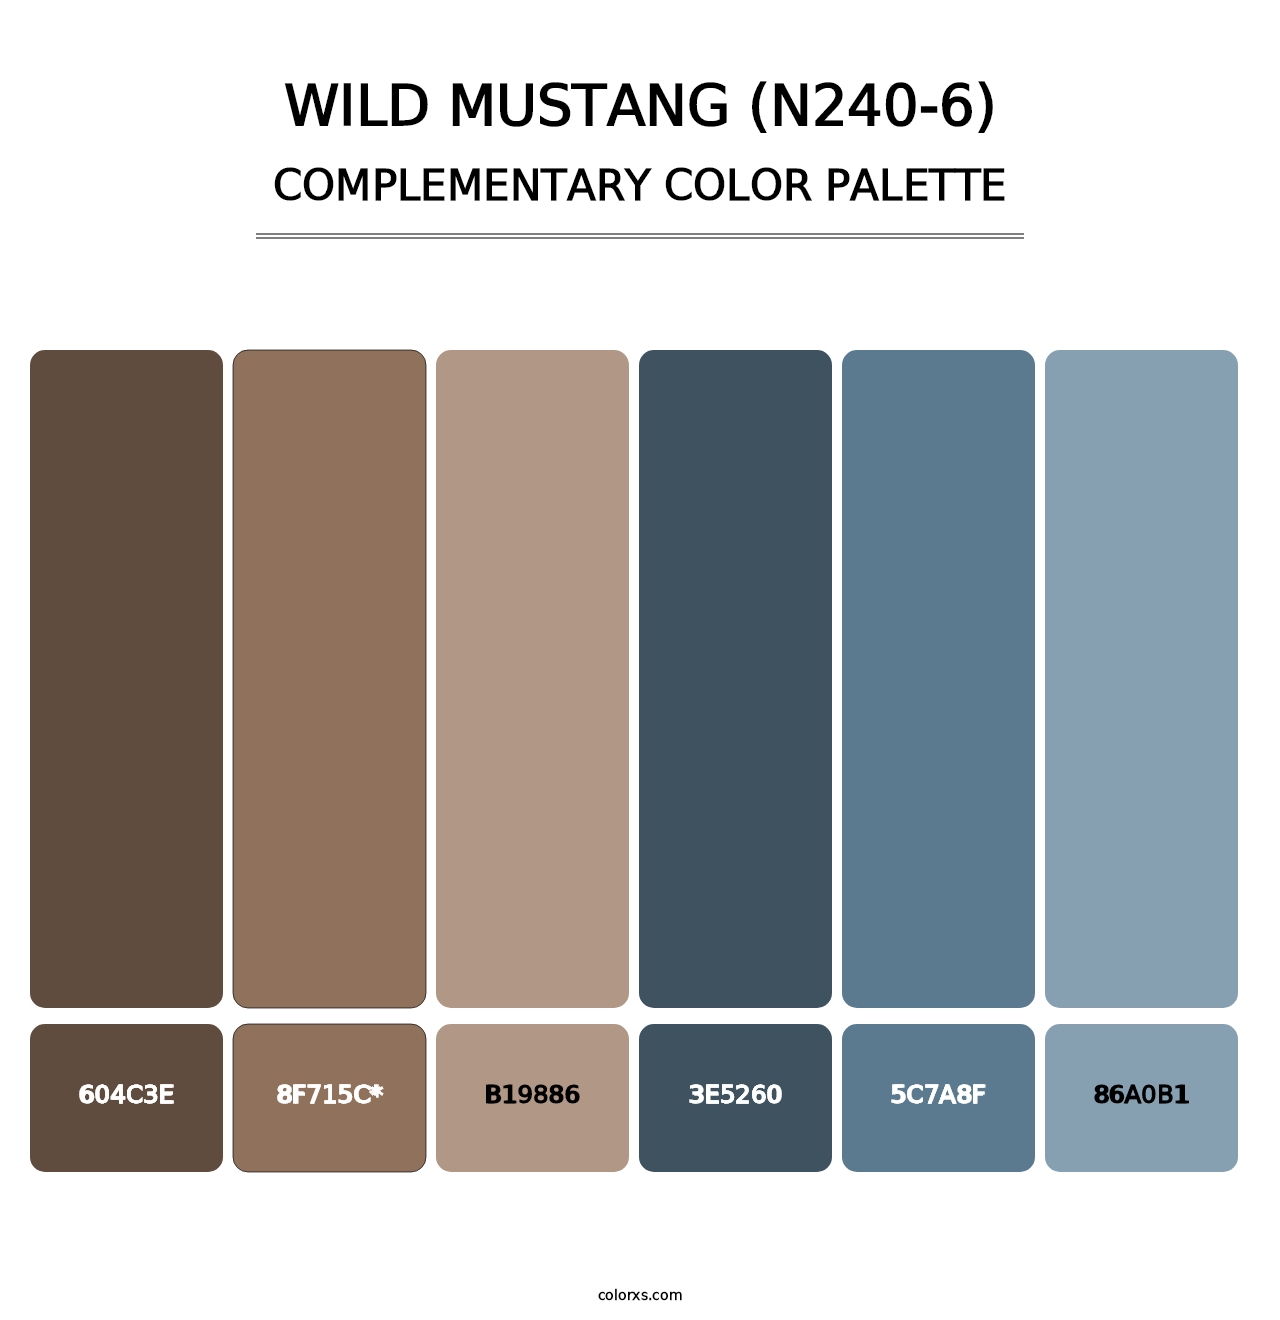 Wild Mustang (N240-6) - Complementary Color Palette